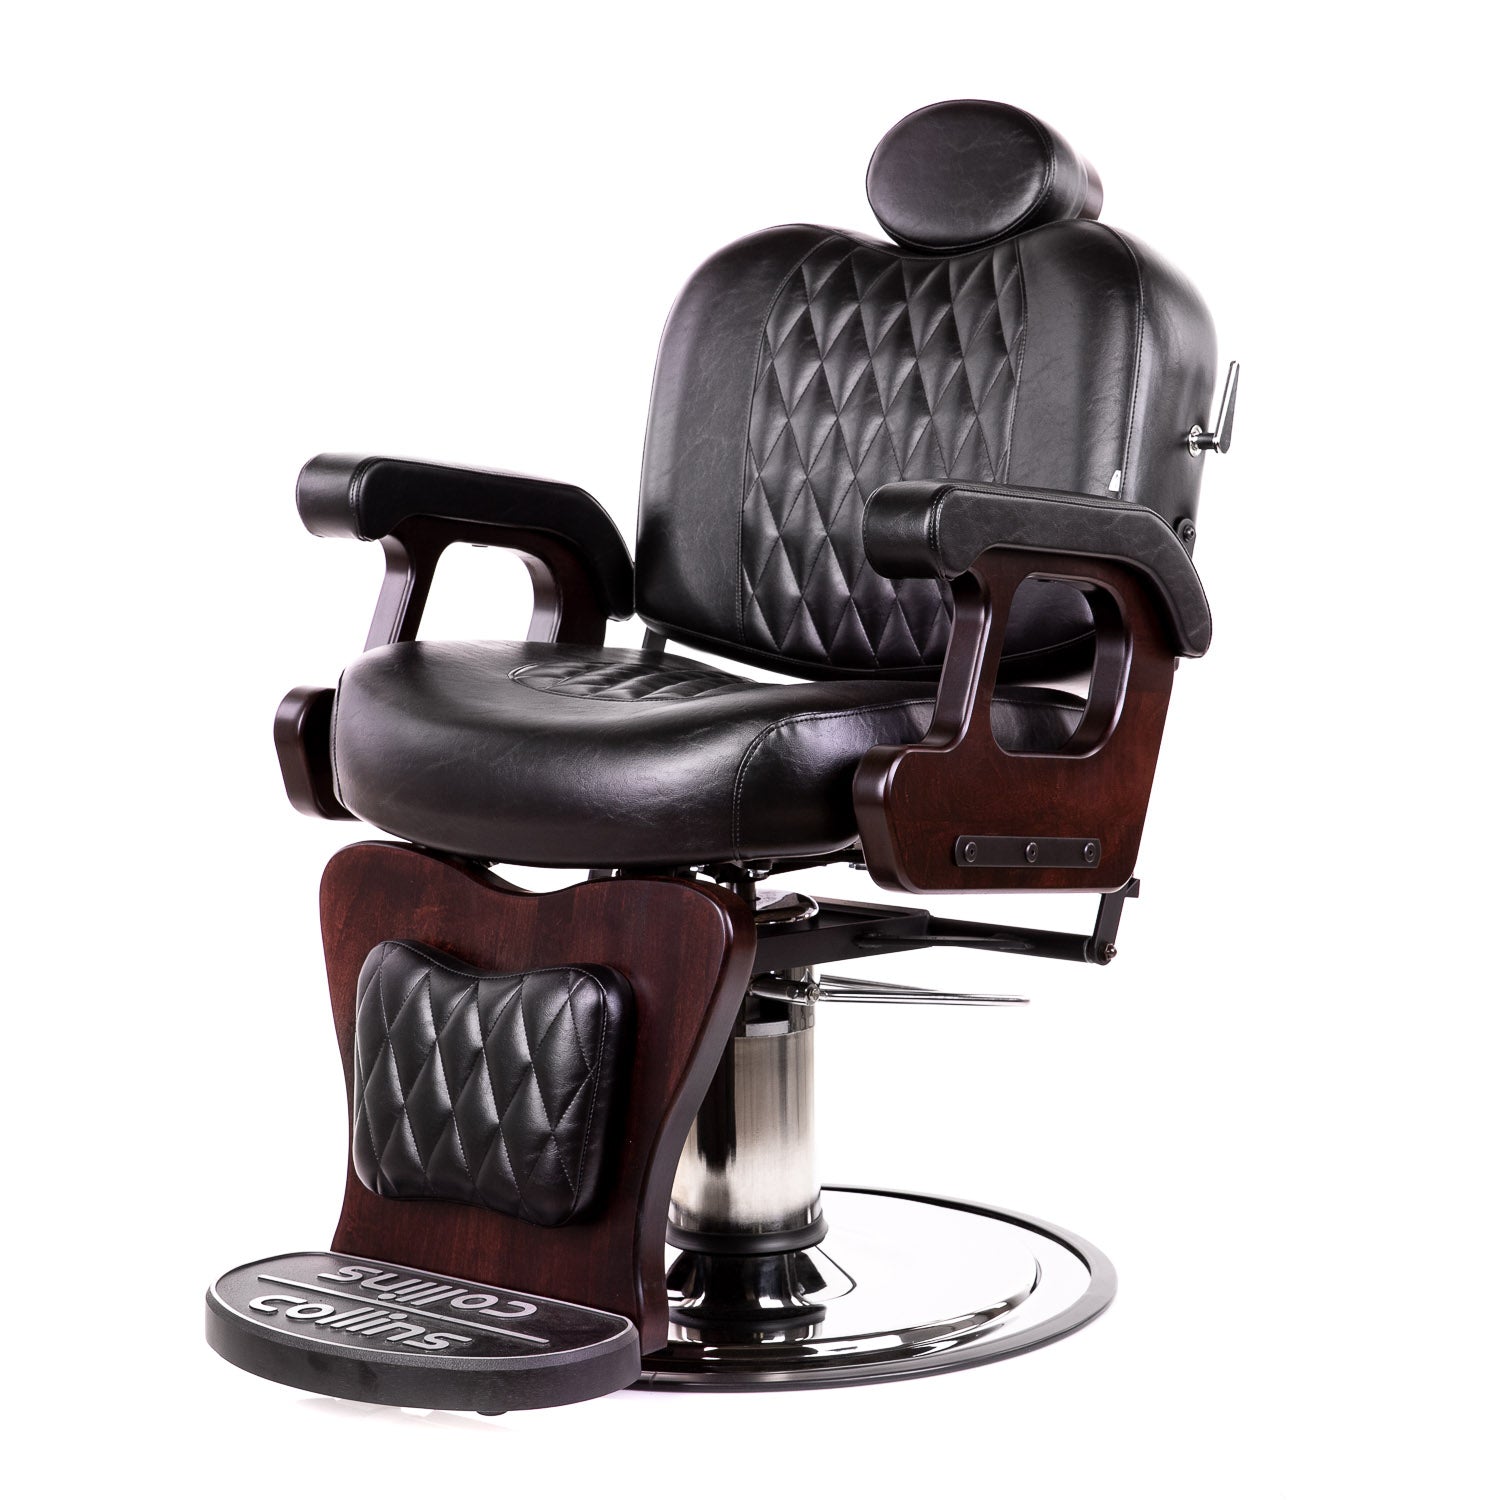 Commander II Barber Chair - Collins - Salon Equipment and Barber Equipment